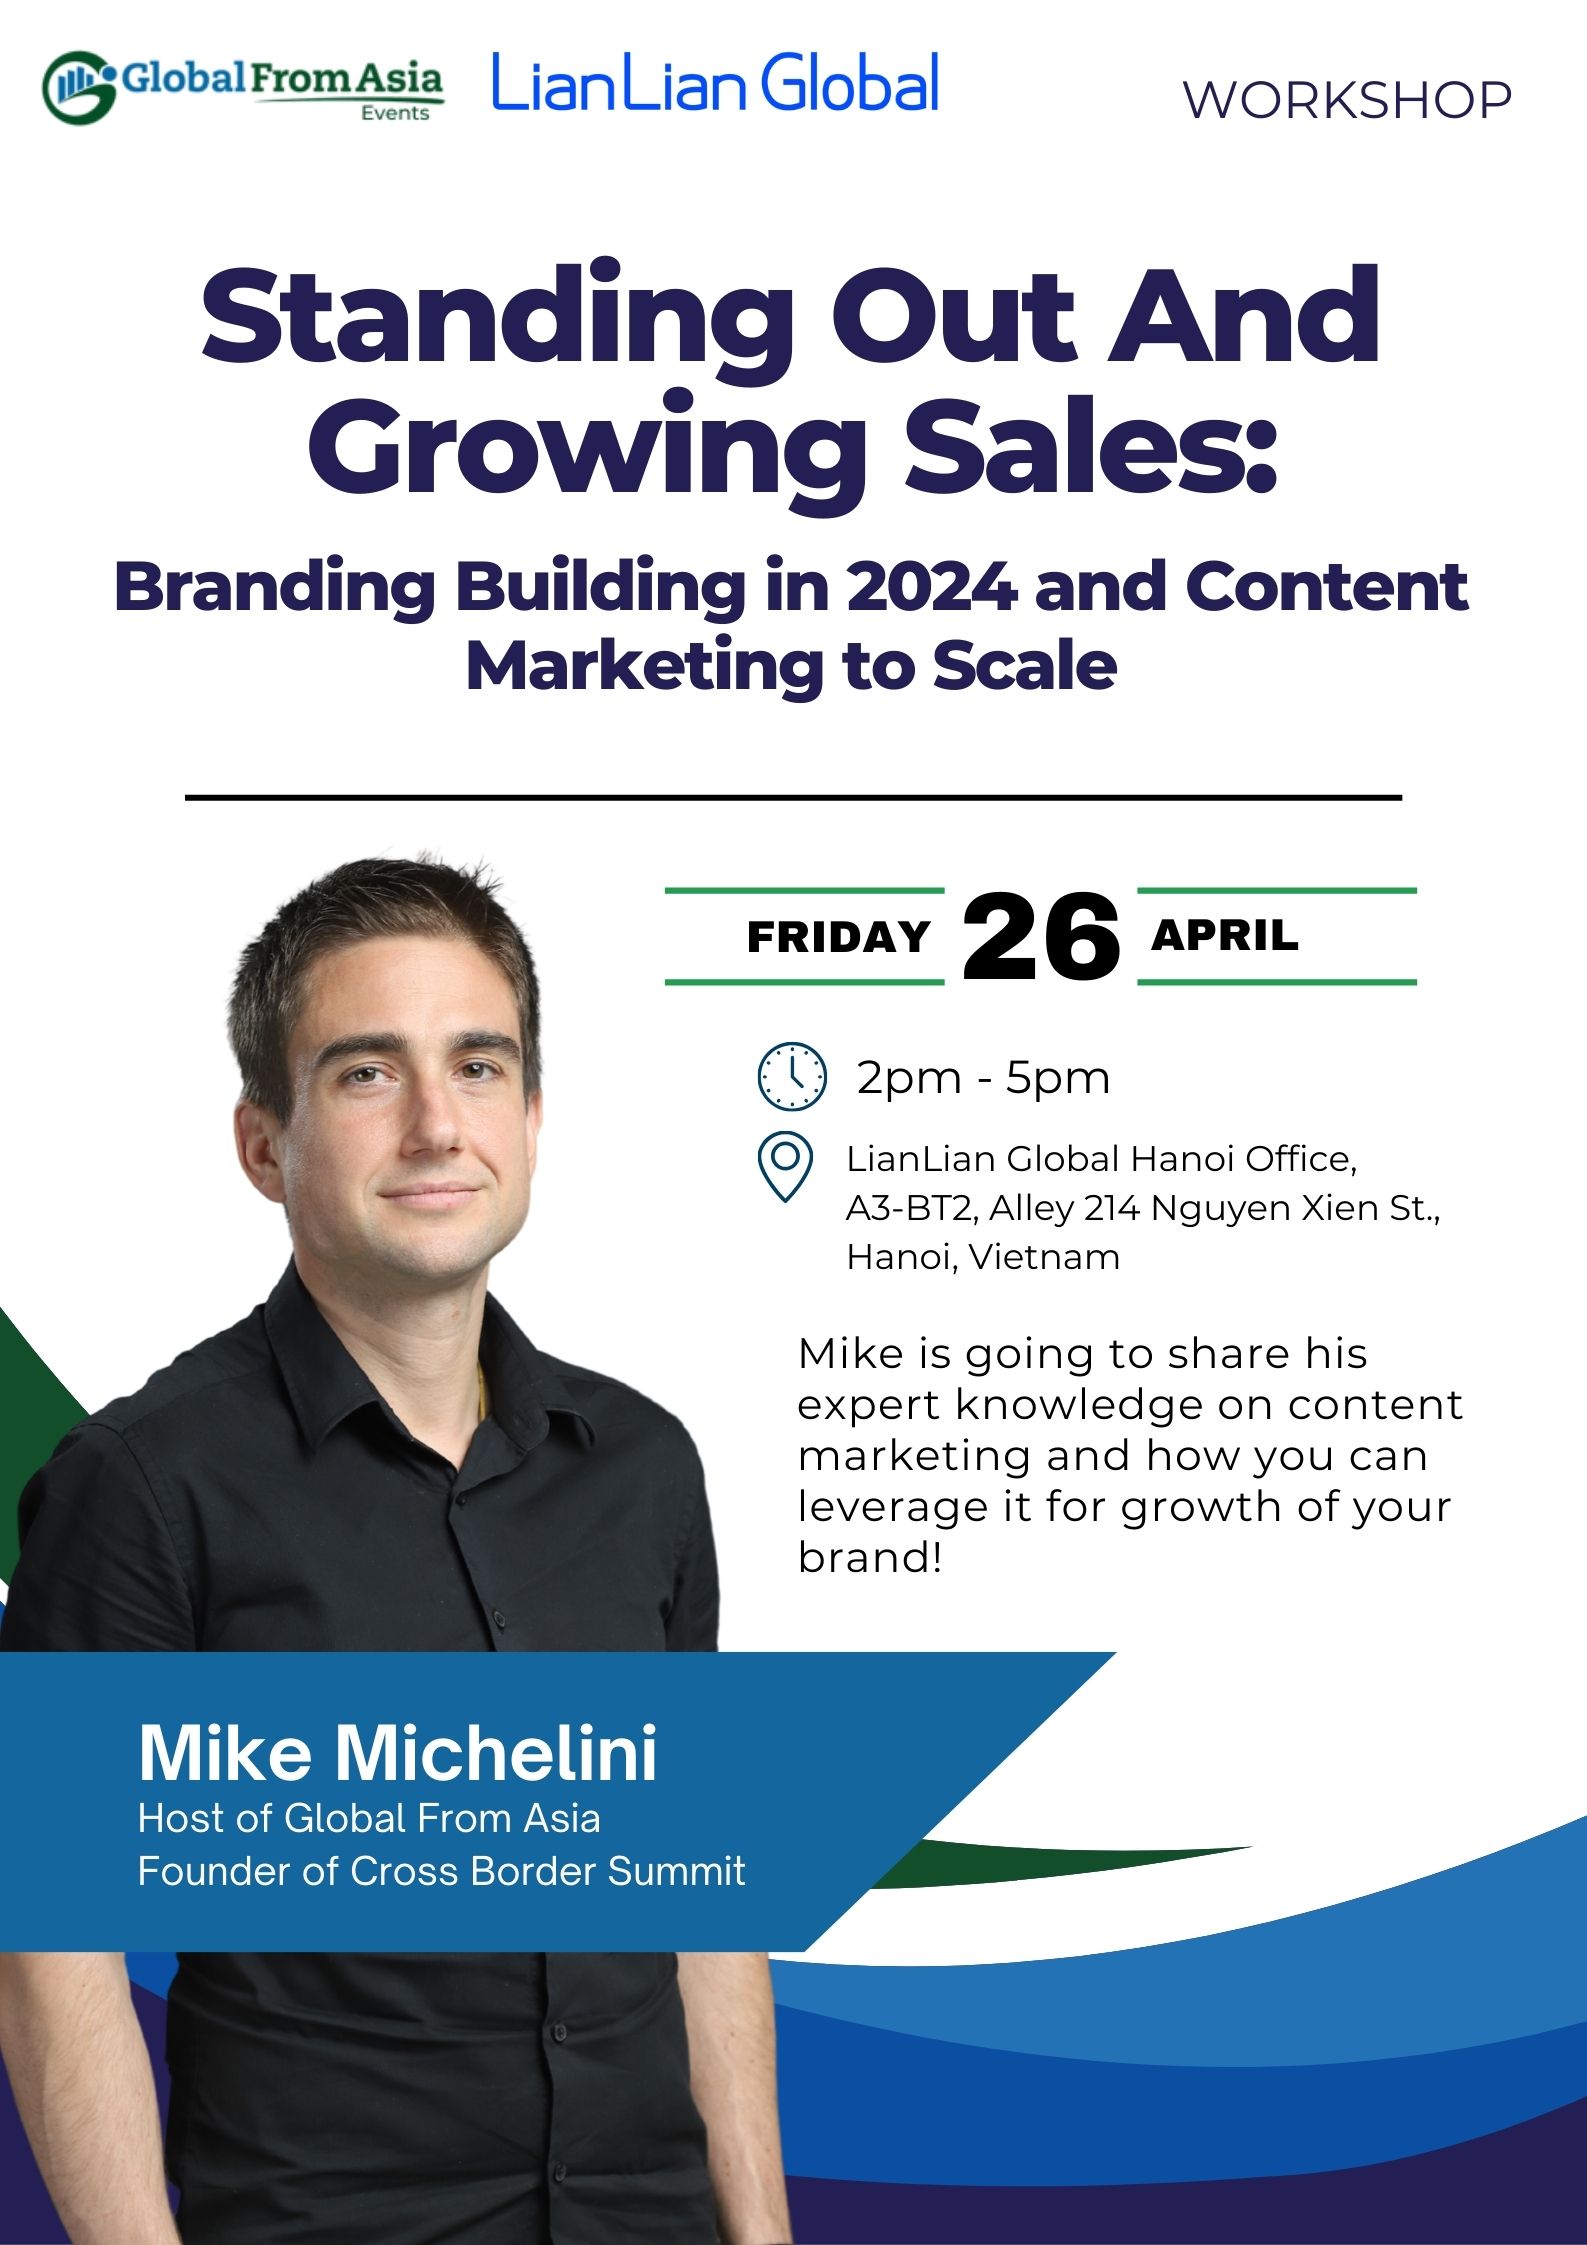 Standing Out And Growing Sales – Branding Building in 2024 and Content Marketing to Scale